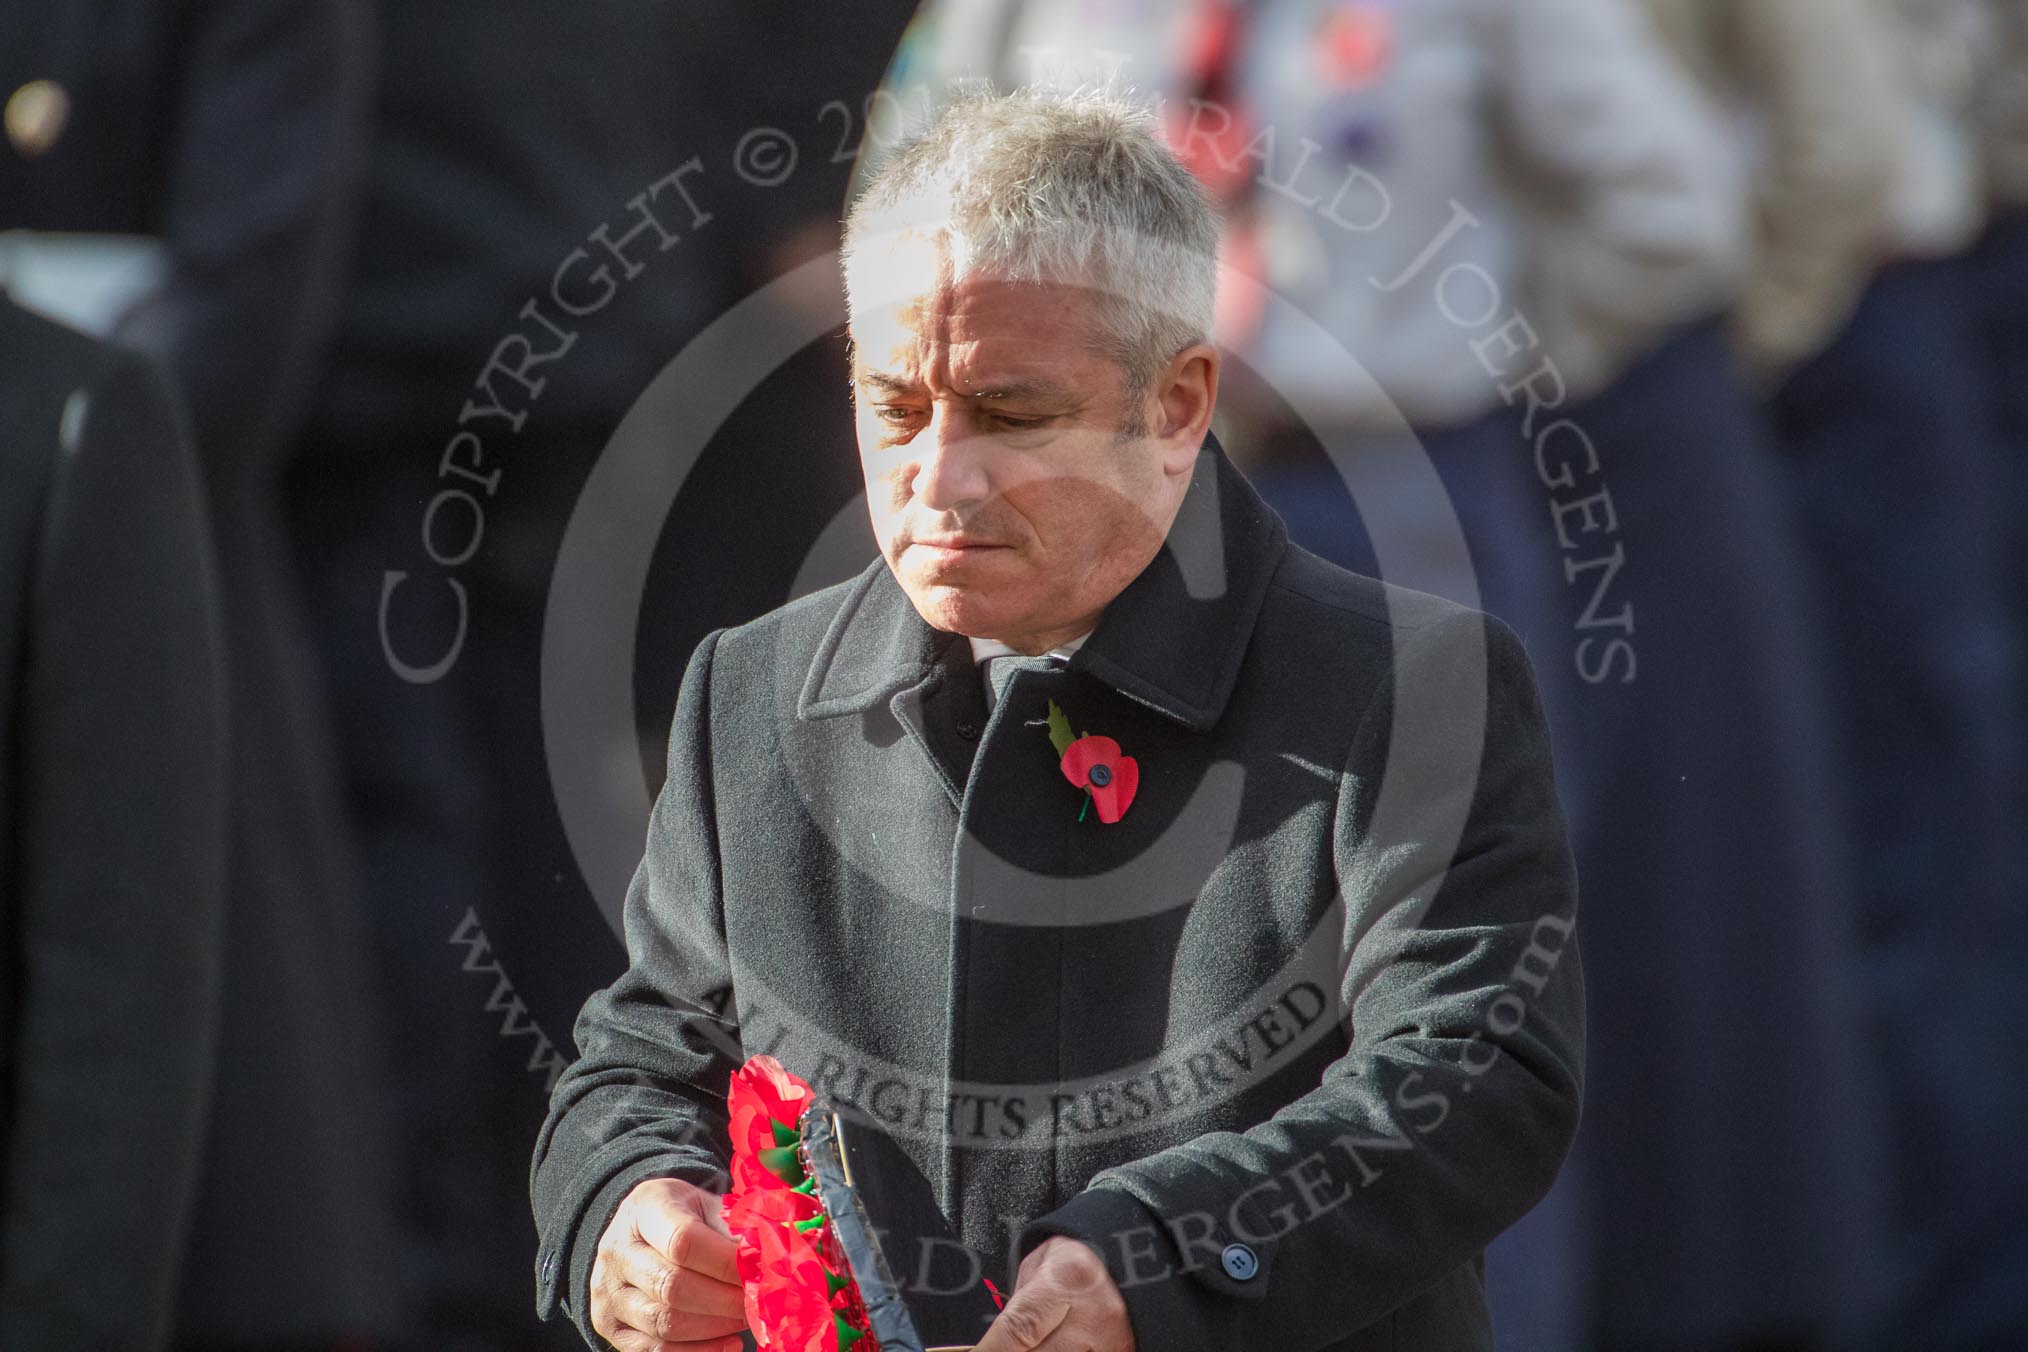 The Rt Hon John Bercow MP, Speaker of the House of Commons (on behalf of Parliament representing members of the House of Commons) during the Remembrance Sunday Cenotaph Ceremony 2018 at Horse Guards Parade, Westminster, London, 11 November 2018, 11:10.